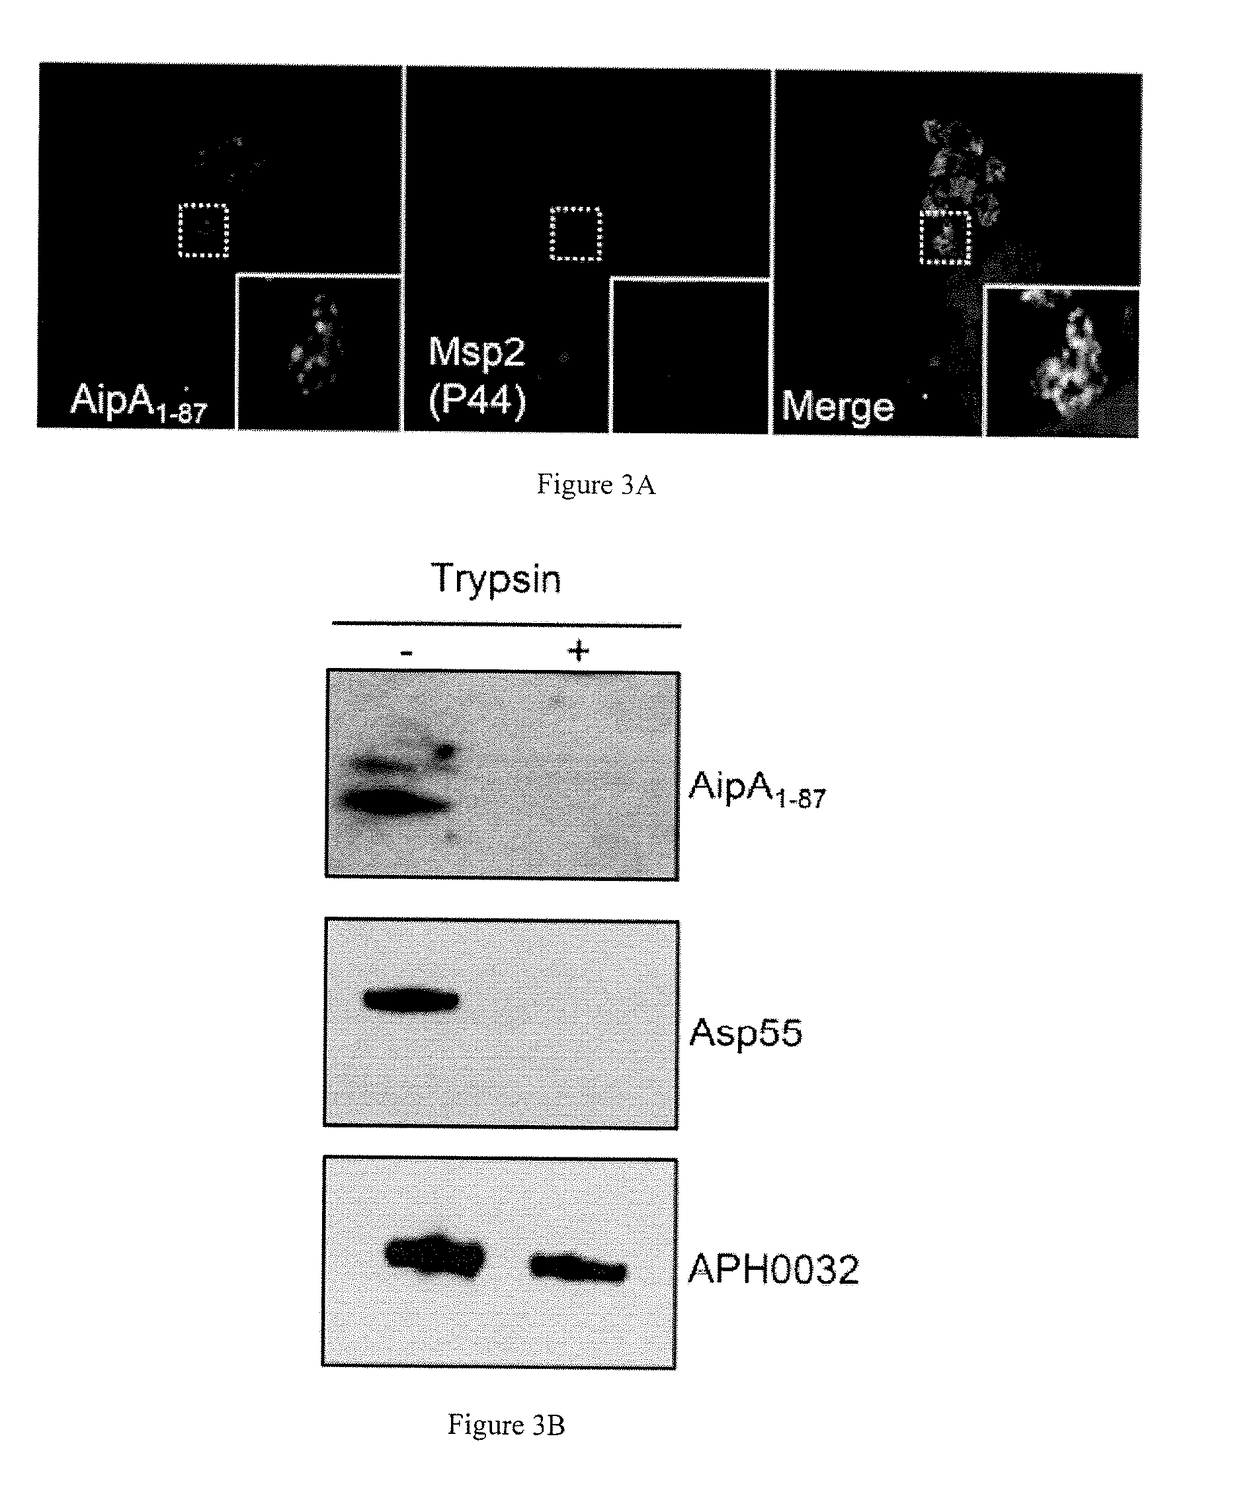 Aipa, ompa, and asp14 in vaccine compositions and diagnostic targets for anaplasma phagocytophilum infection